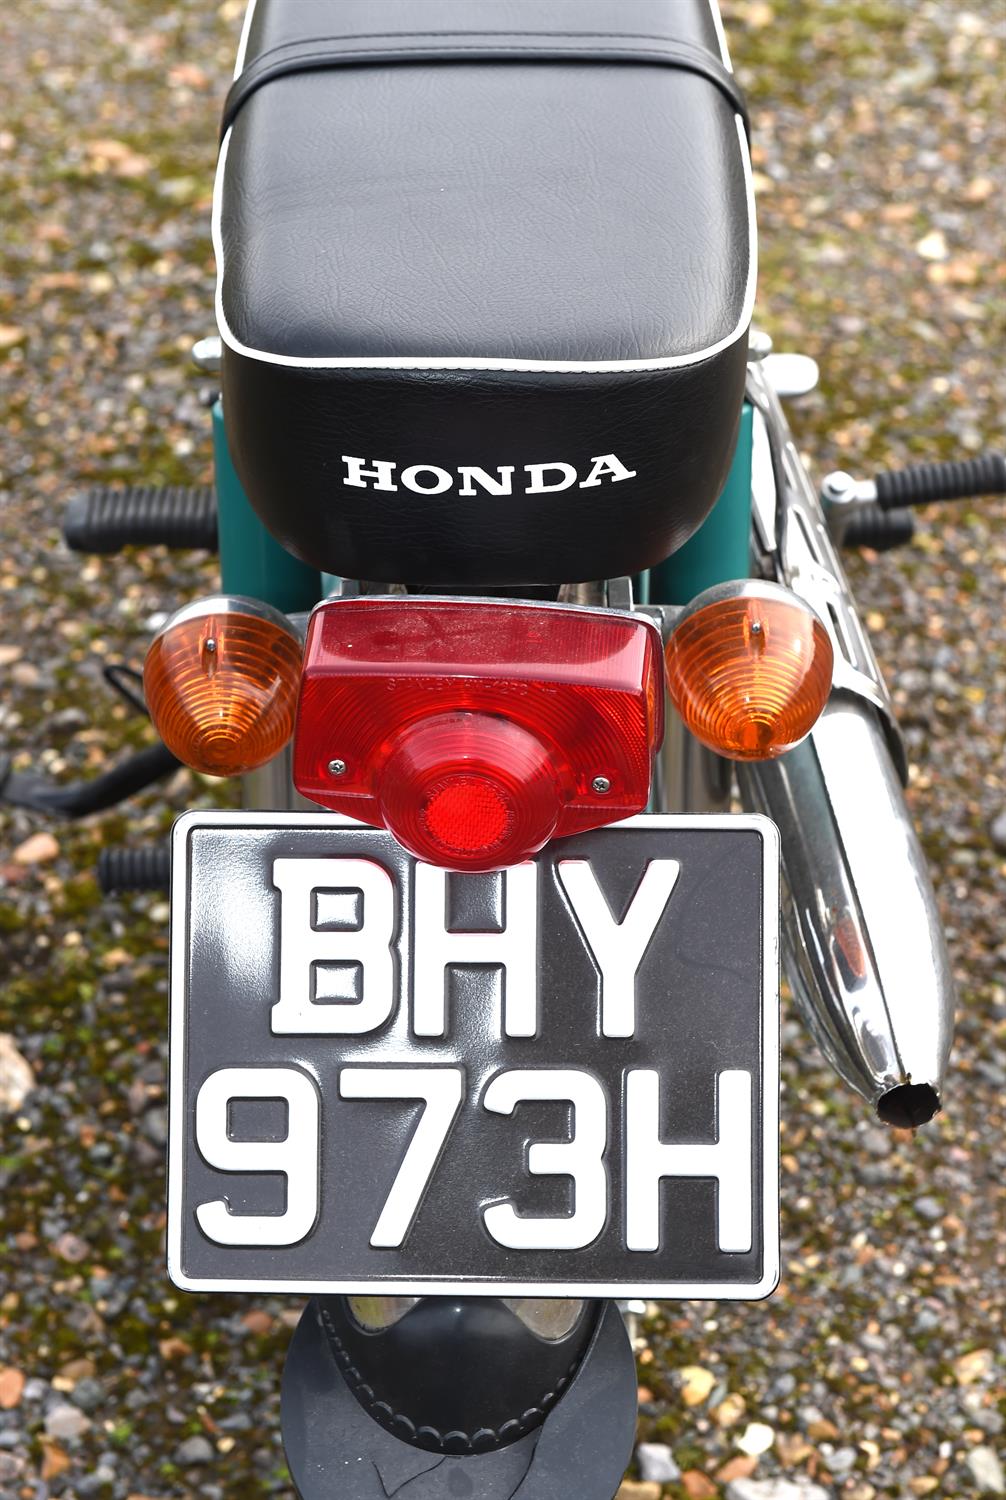 1969 Honda SS50 4 Speed. Registration number: BHY 973H. This Honda SS50 was restored in 2020 prior - Image 5 of 9